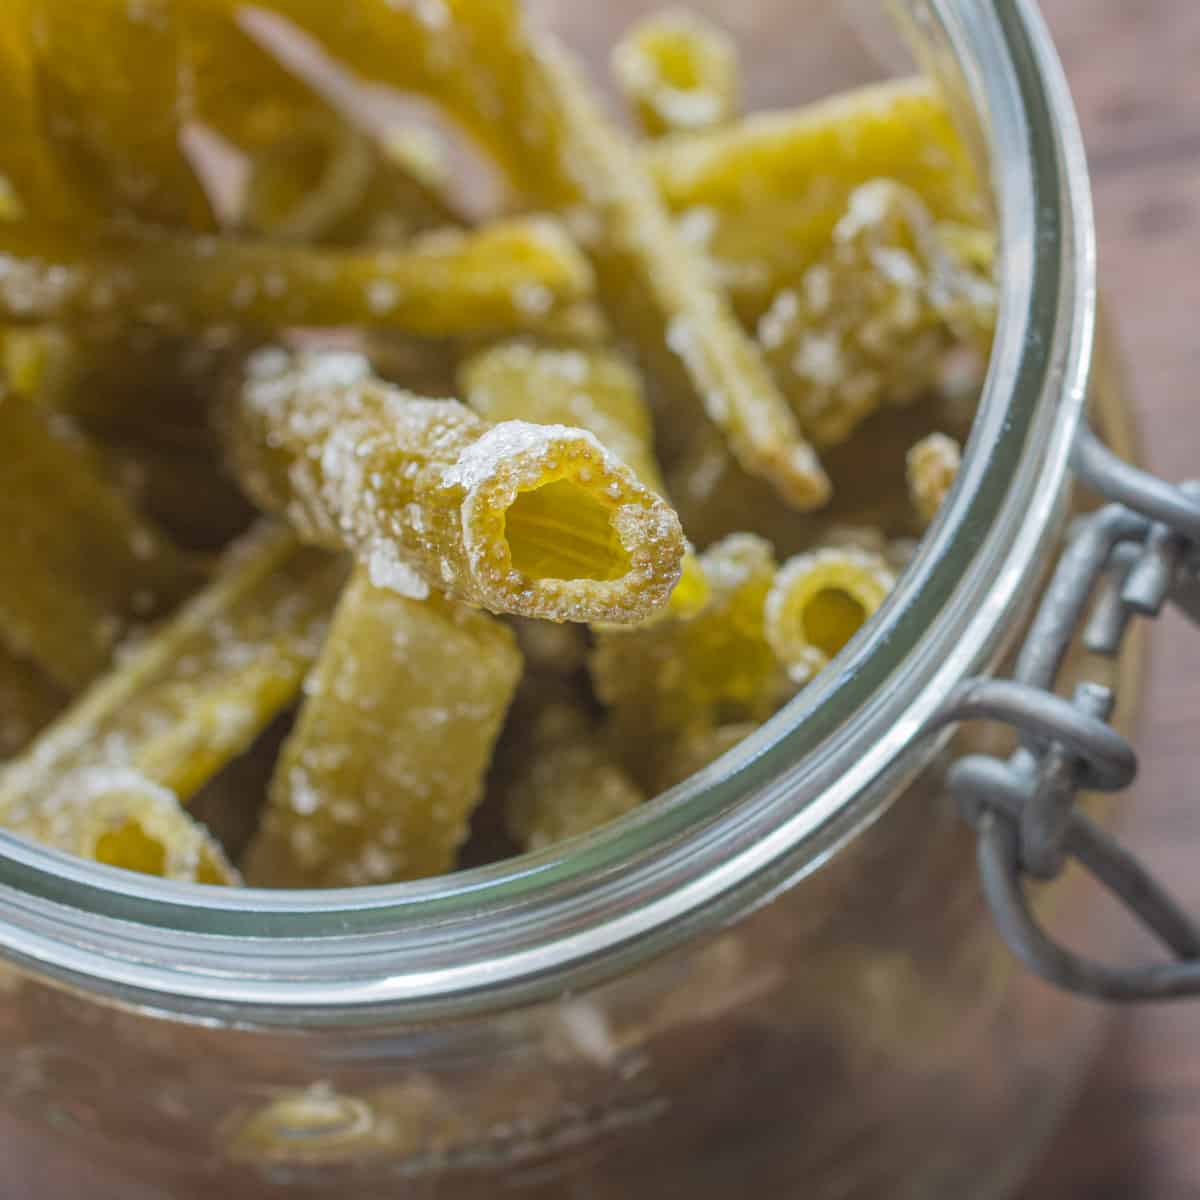 candied angelica stems